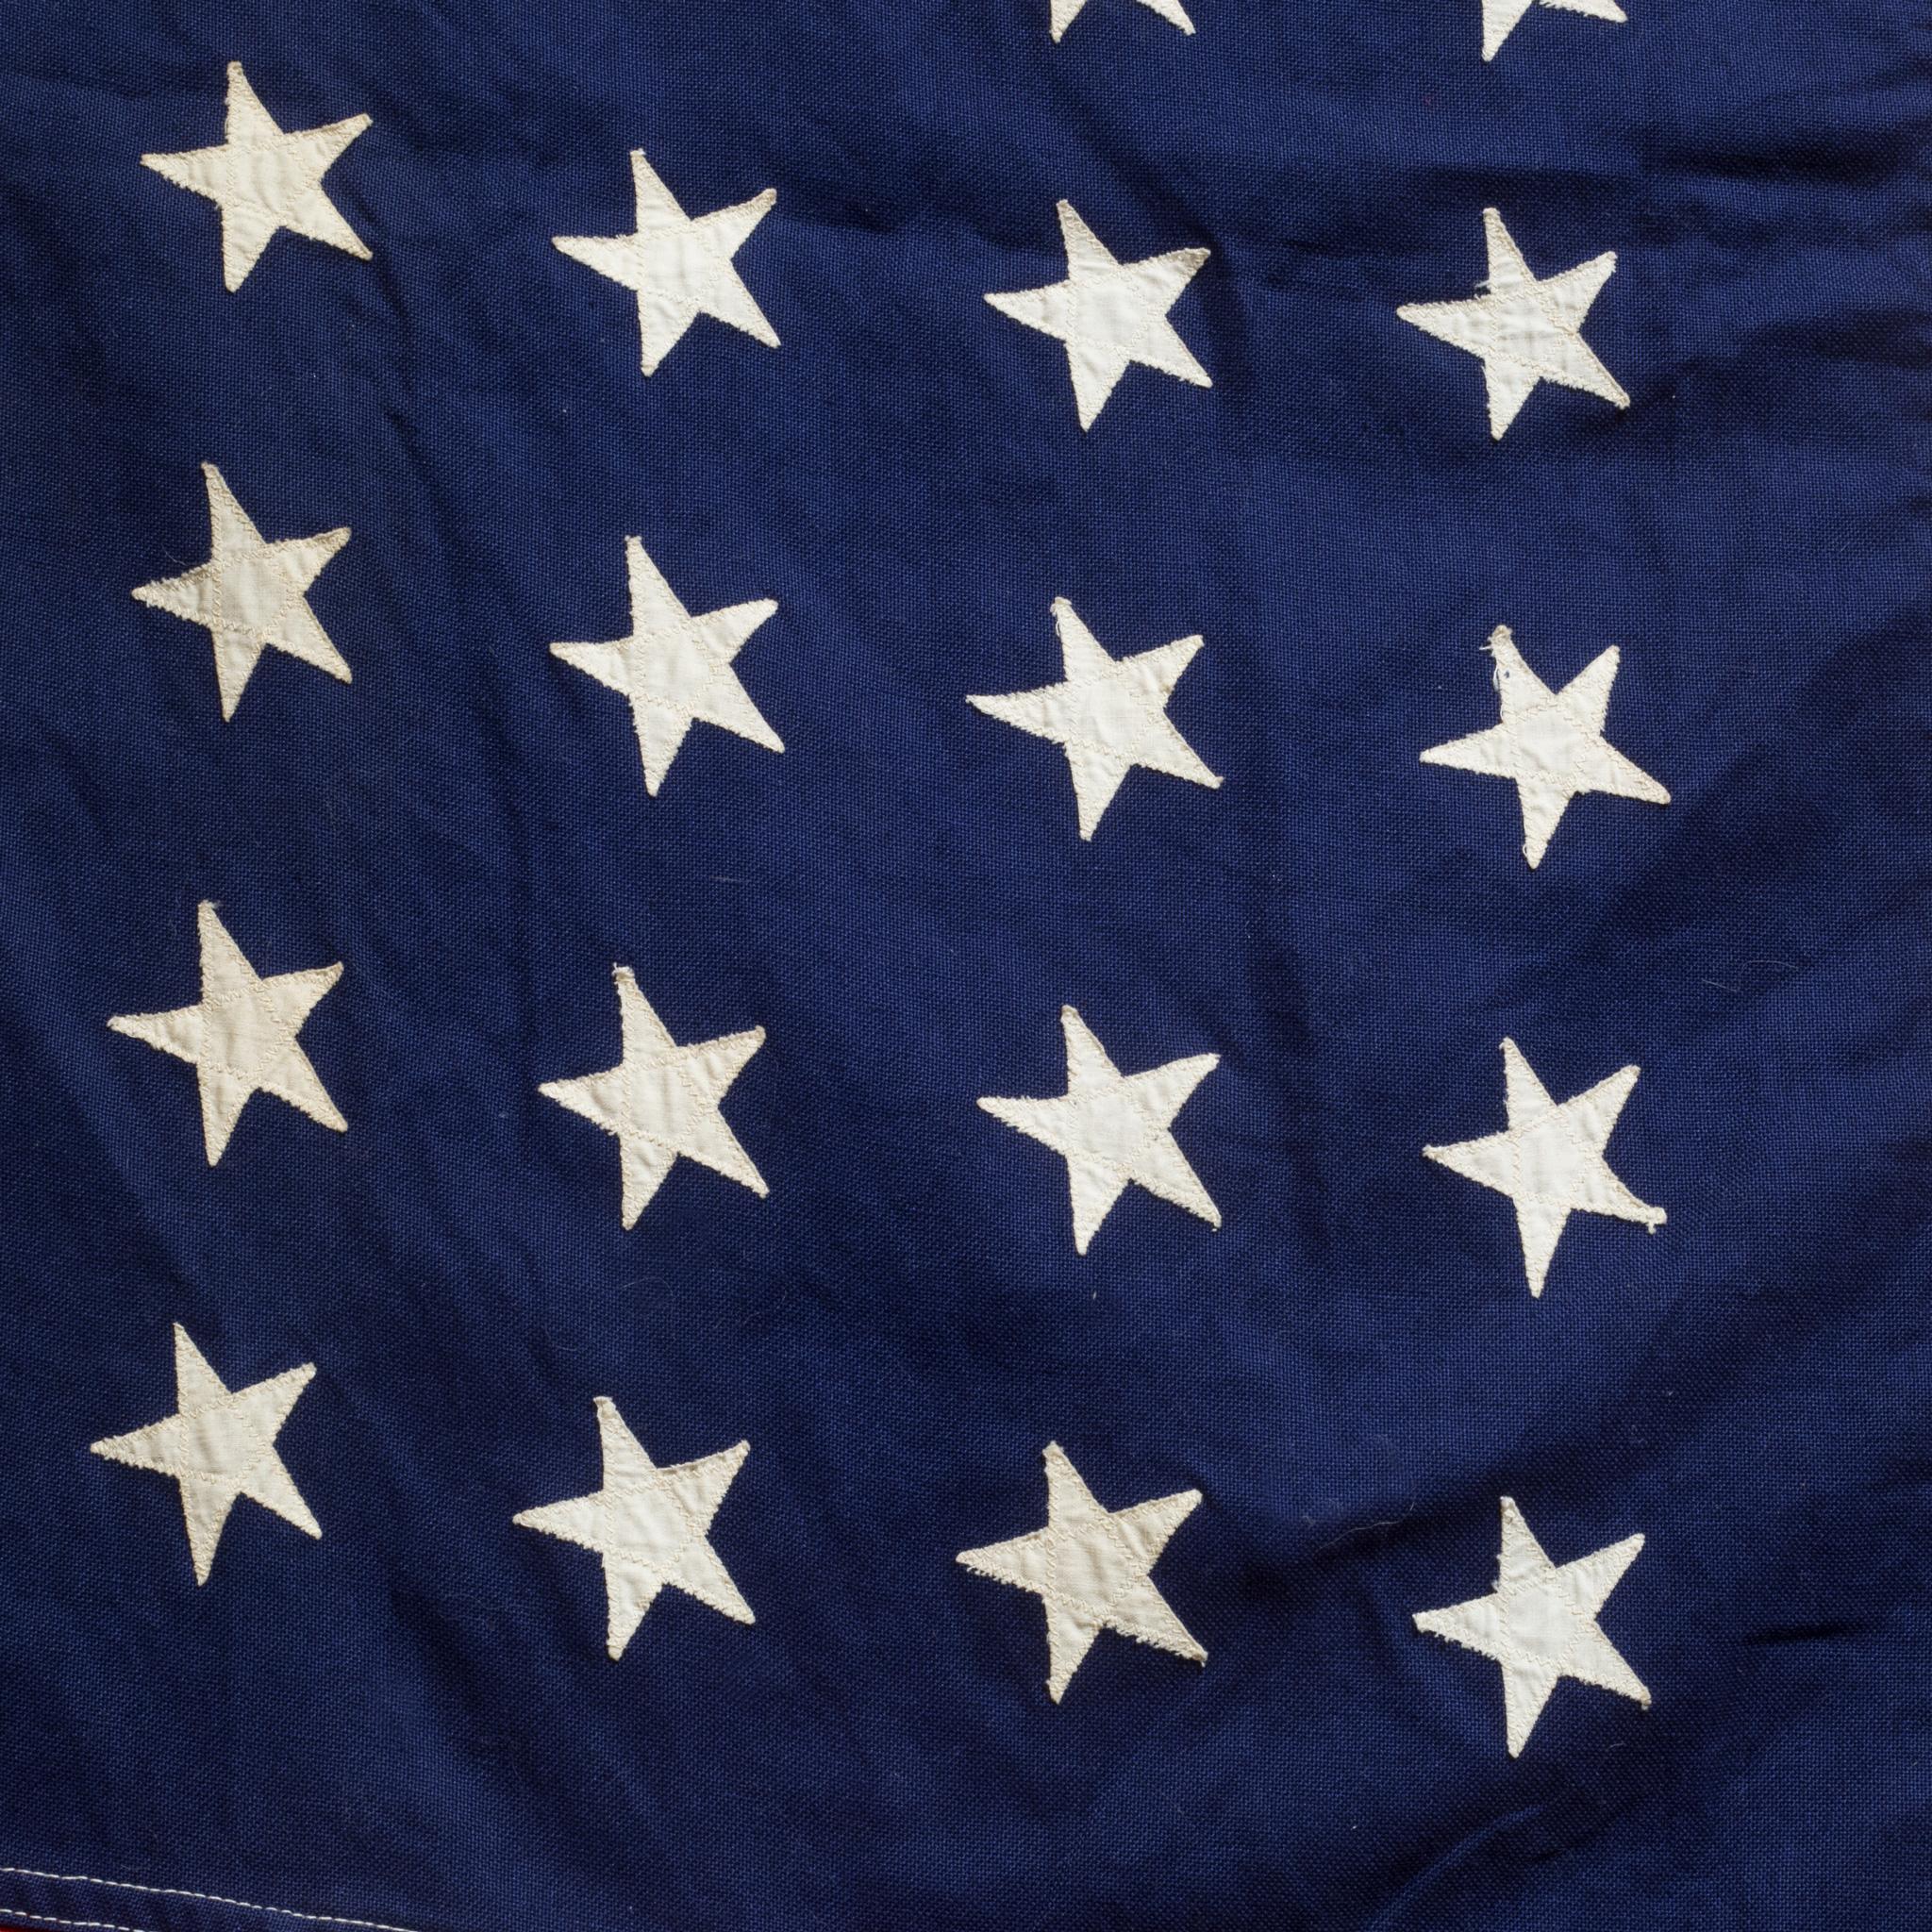 American Classical Early 20th C. Monumental American Flag with 48 Stars c.1940-1950